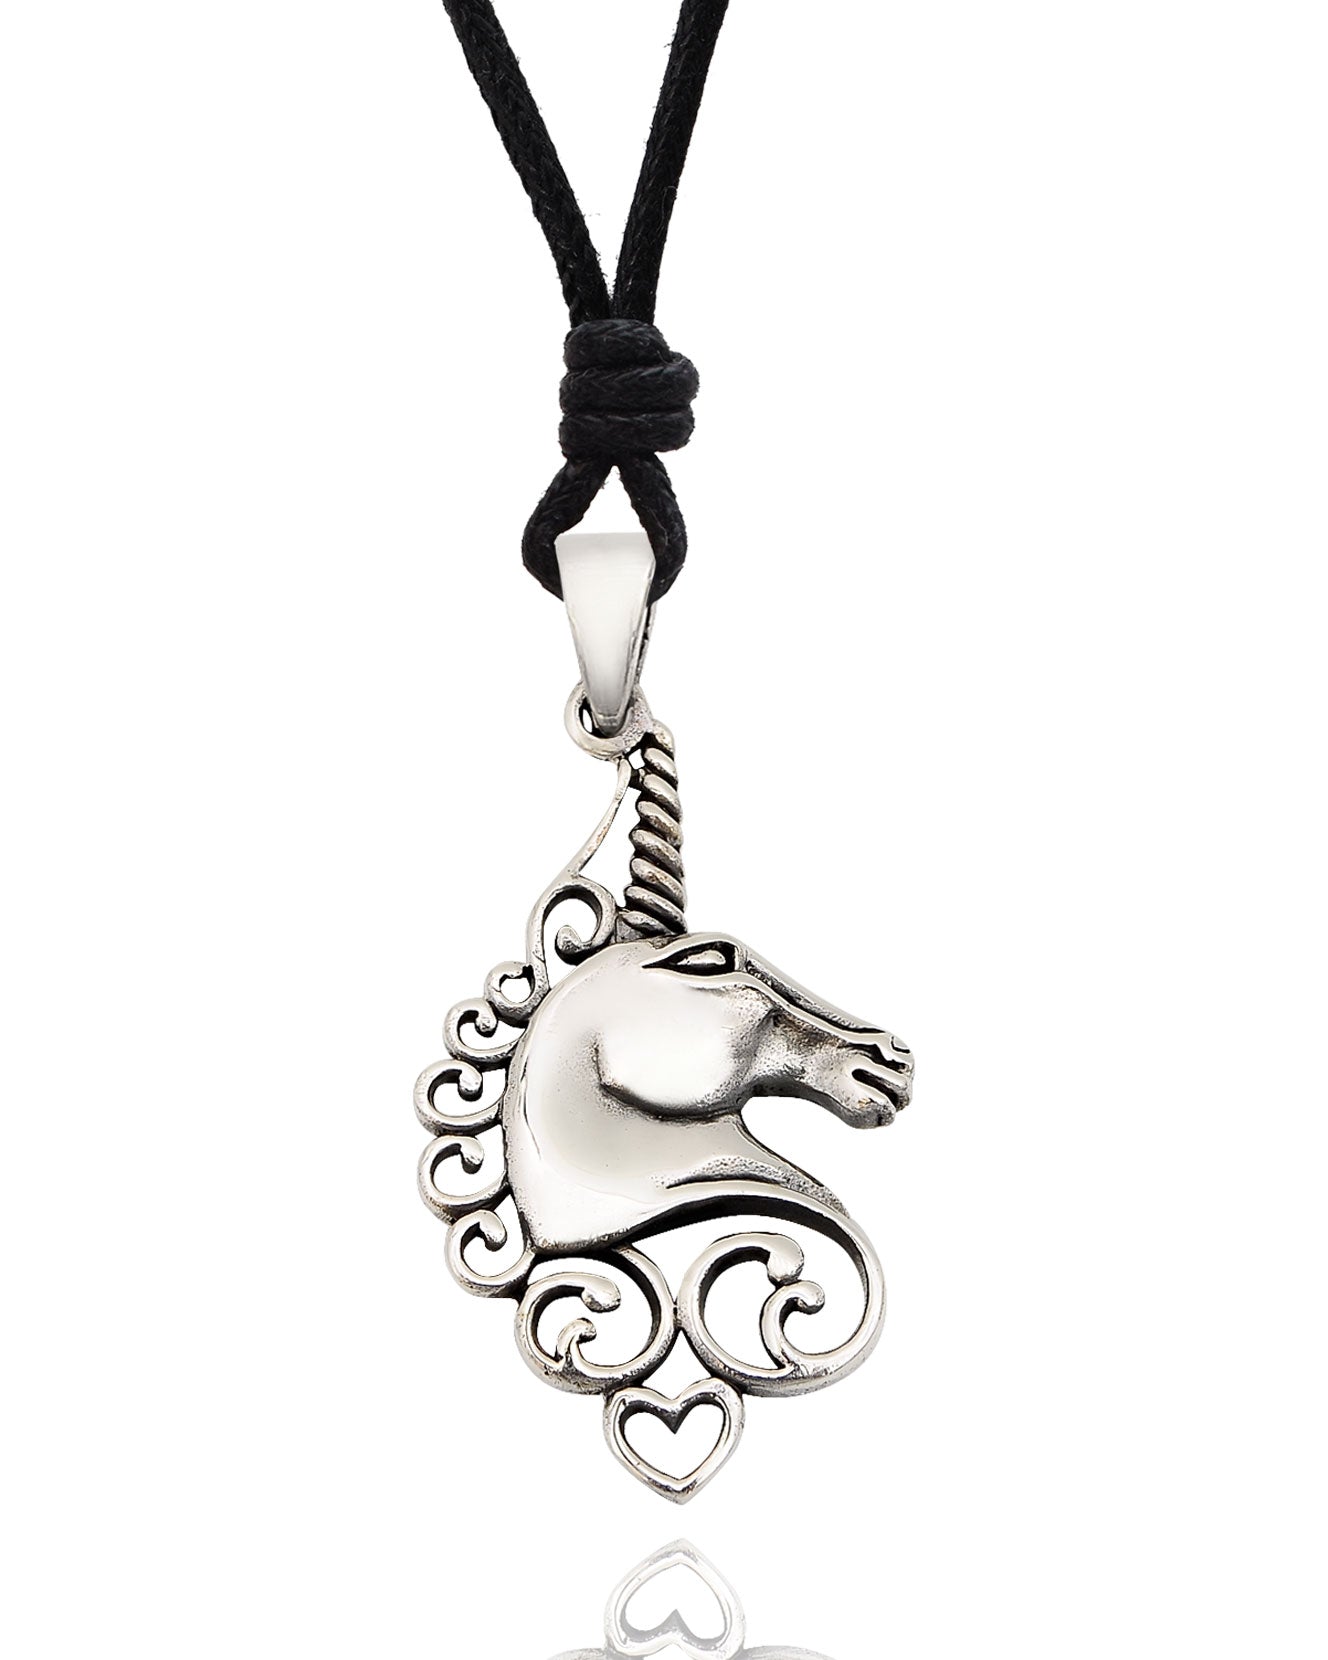 Unicorn 92.5 Sterling Siver Pewter Gold Brass Charm Necklace Pendant Jewelry